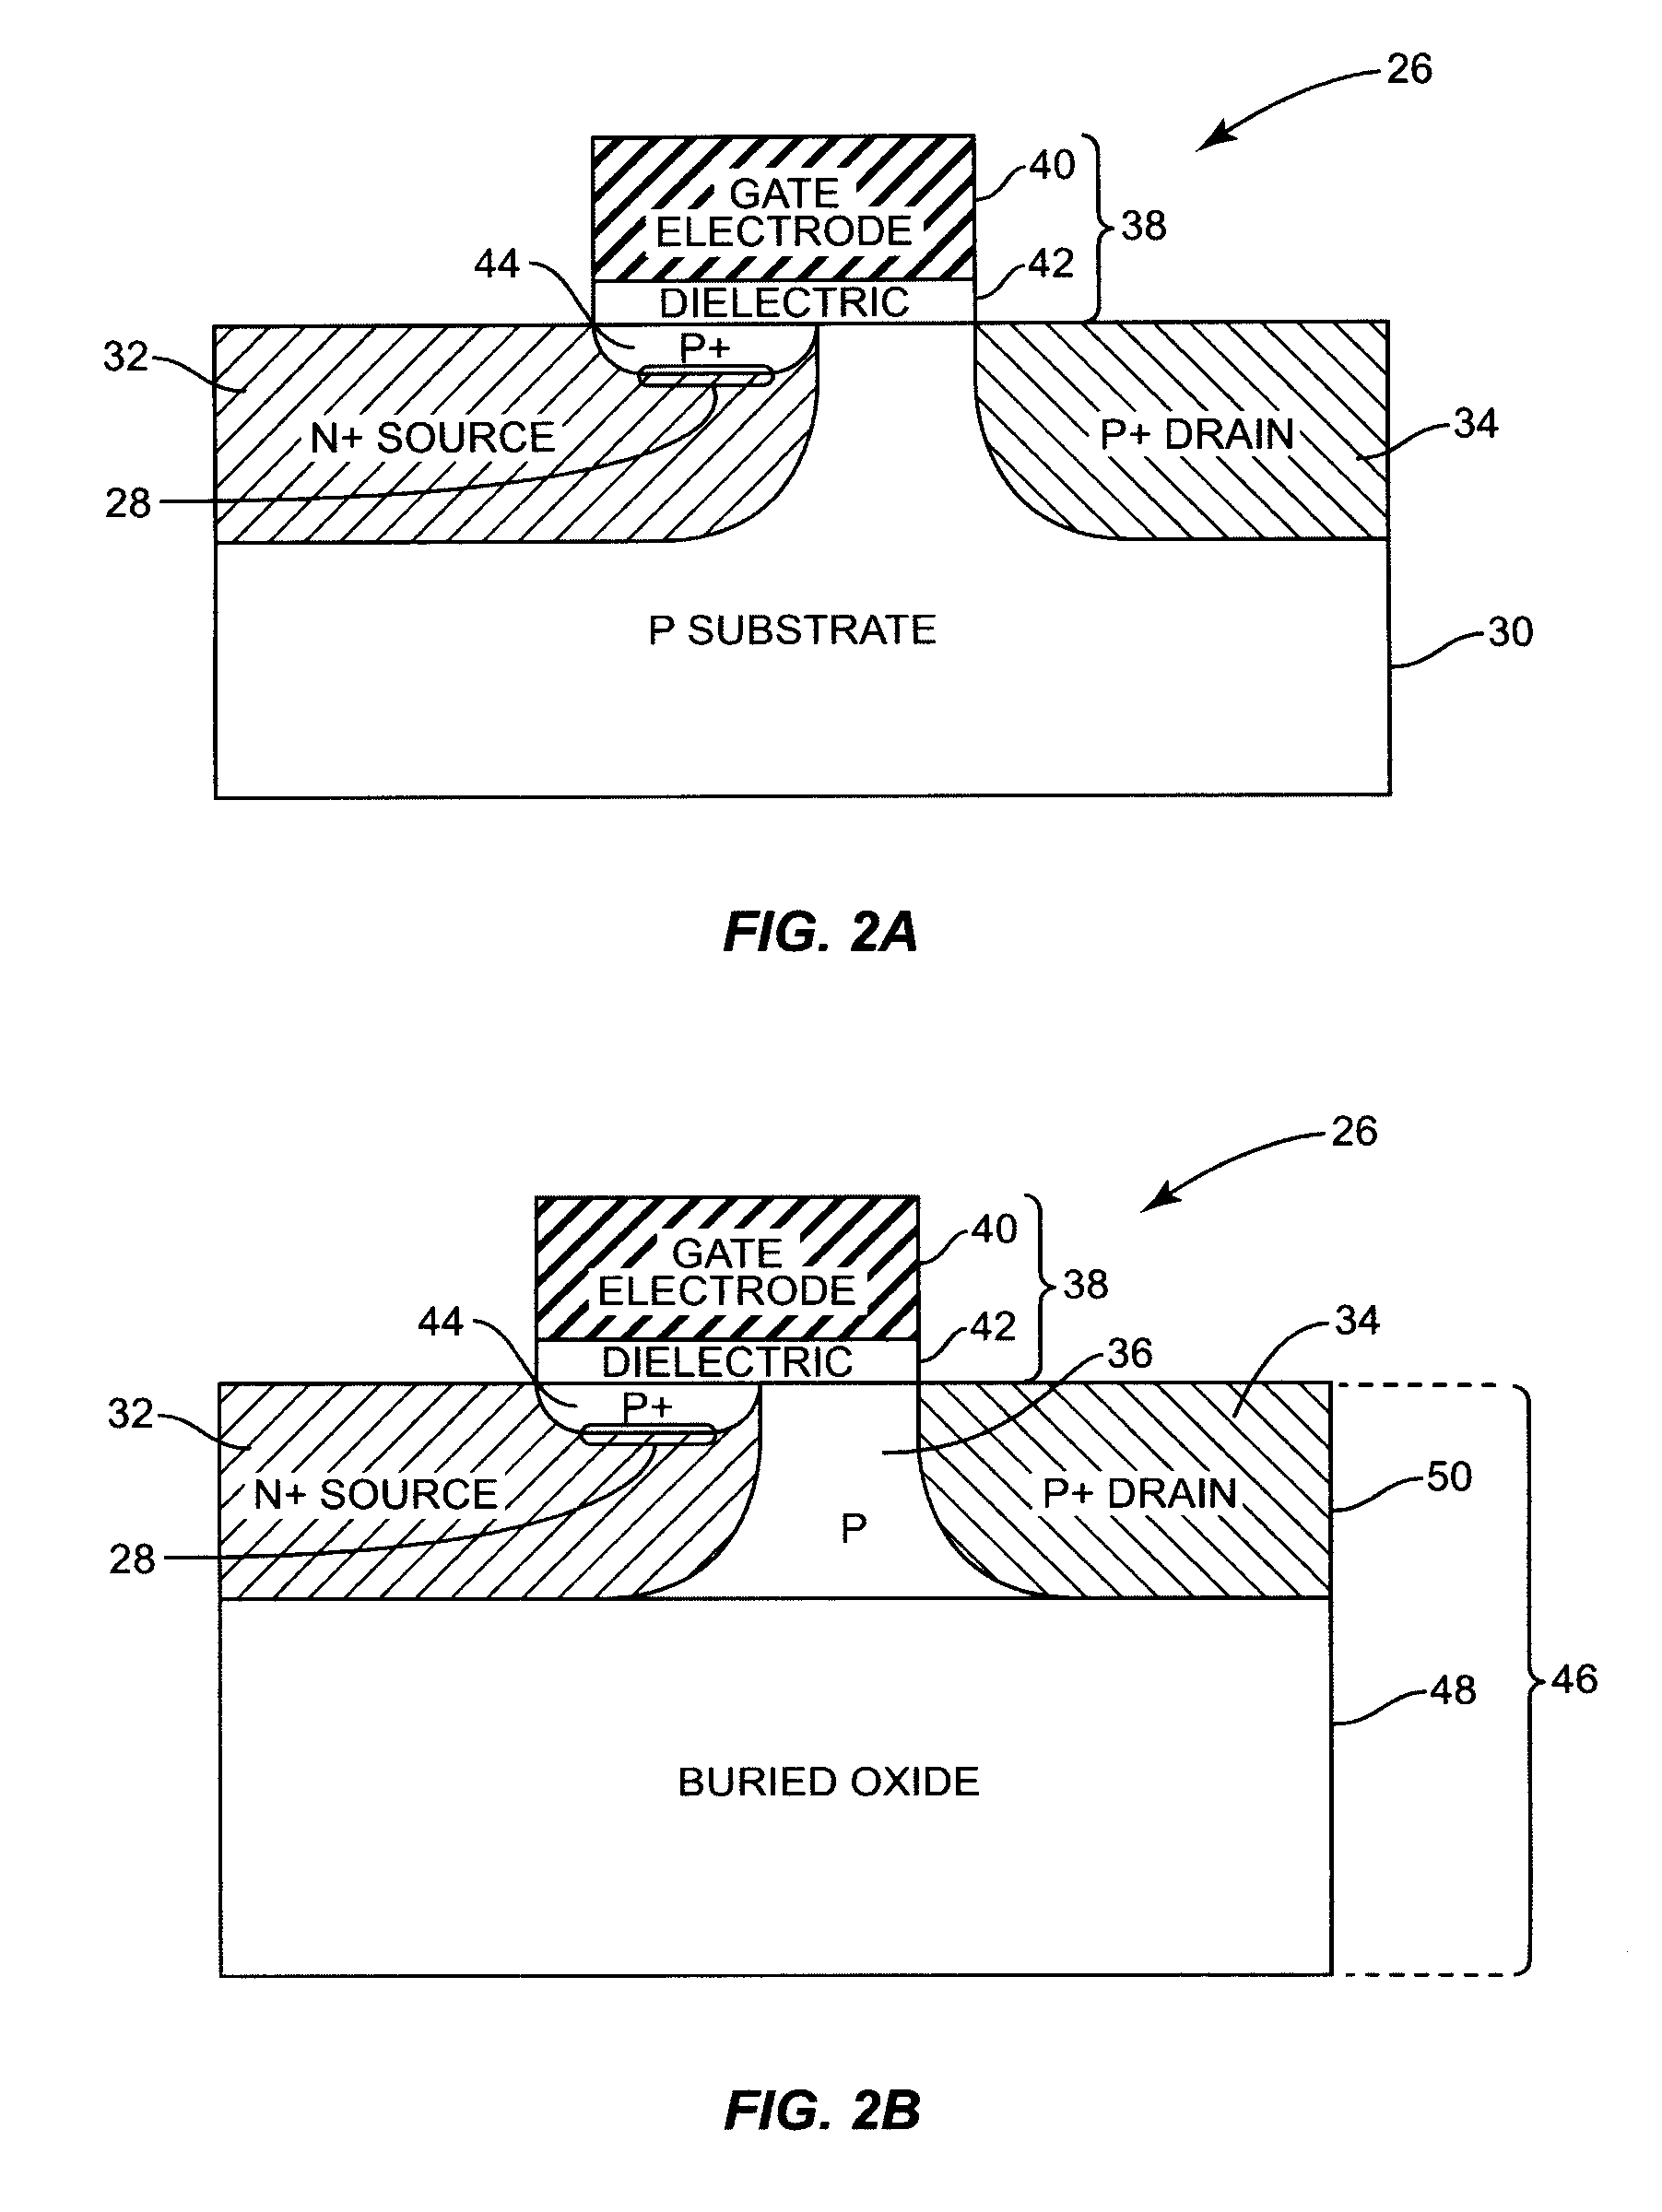 Tunneling transistor suitable for low voltage operation